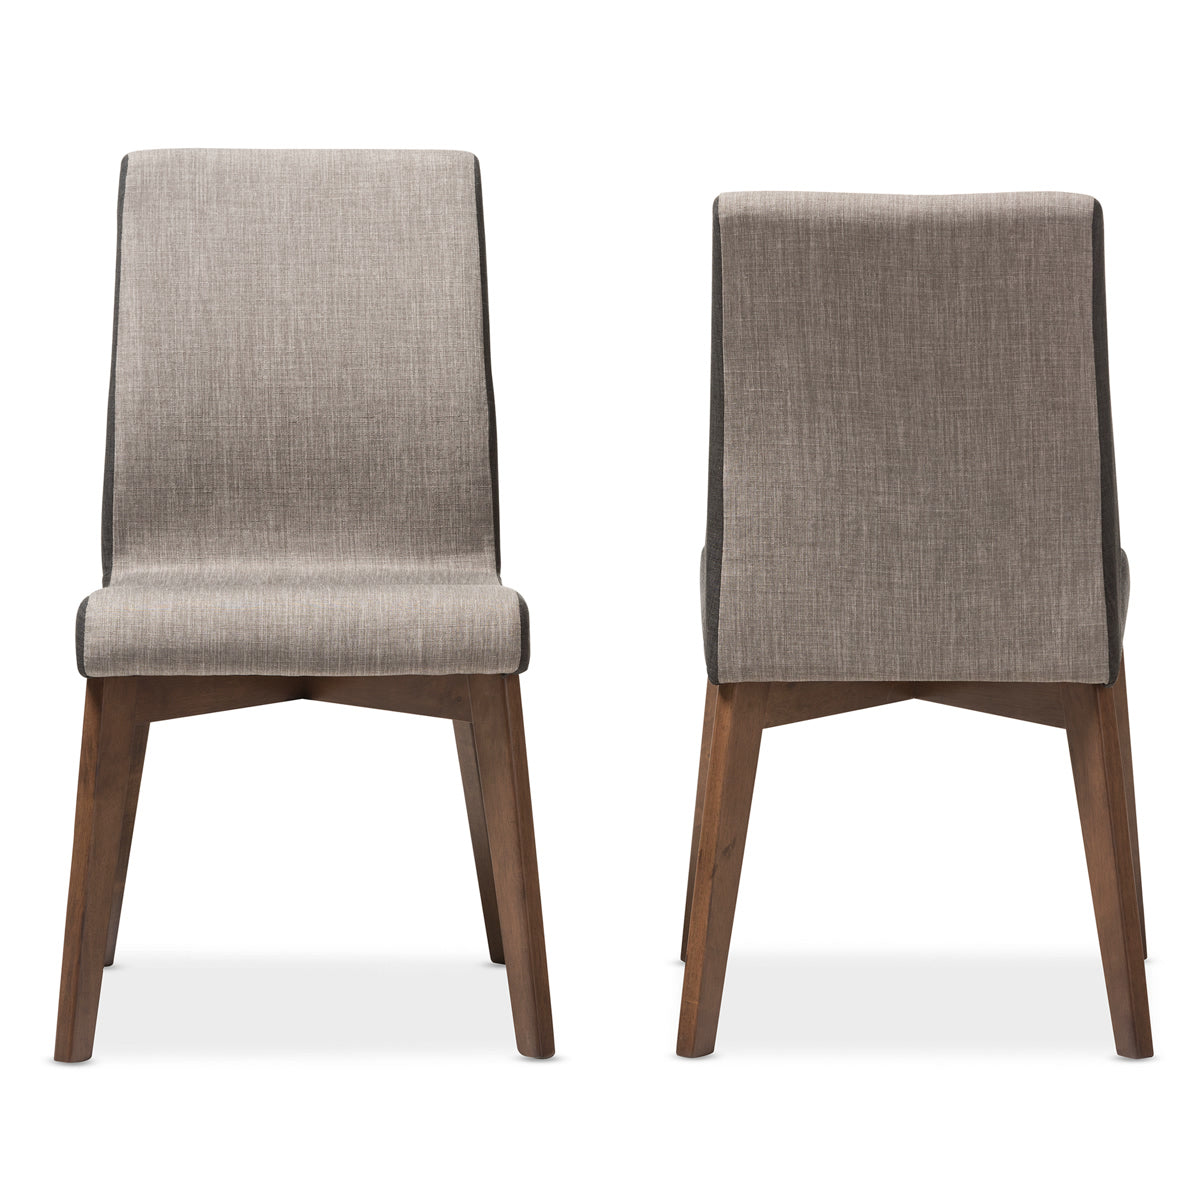 Baxton Studio Kimberly Mid-Century Modern Beige and Brown Fabric Dining Chair (Set of 2) Baxton Studio-dining chair-Minimal And Modern - 3